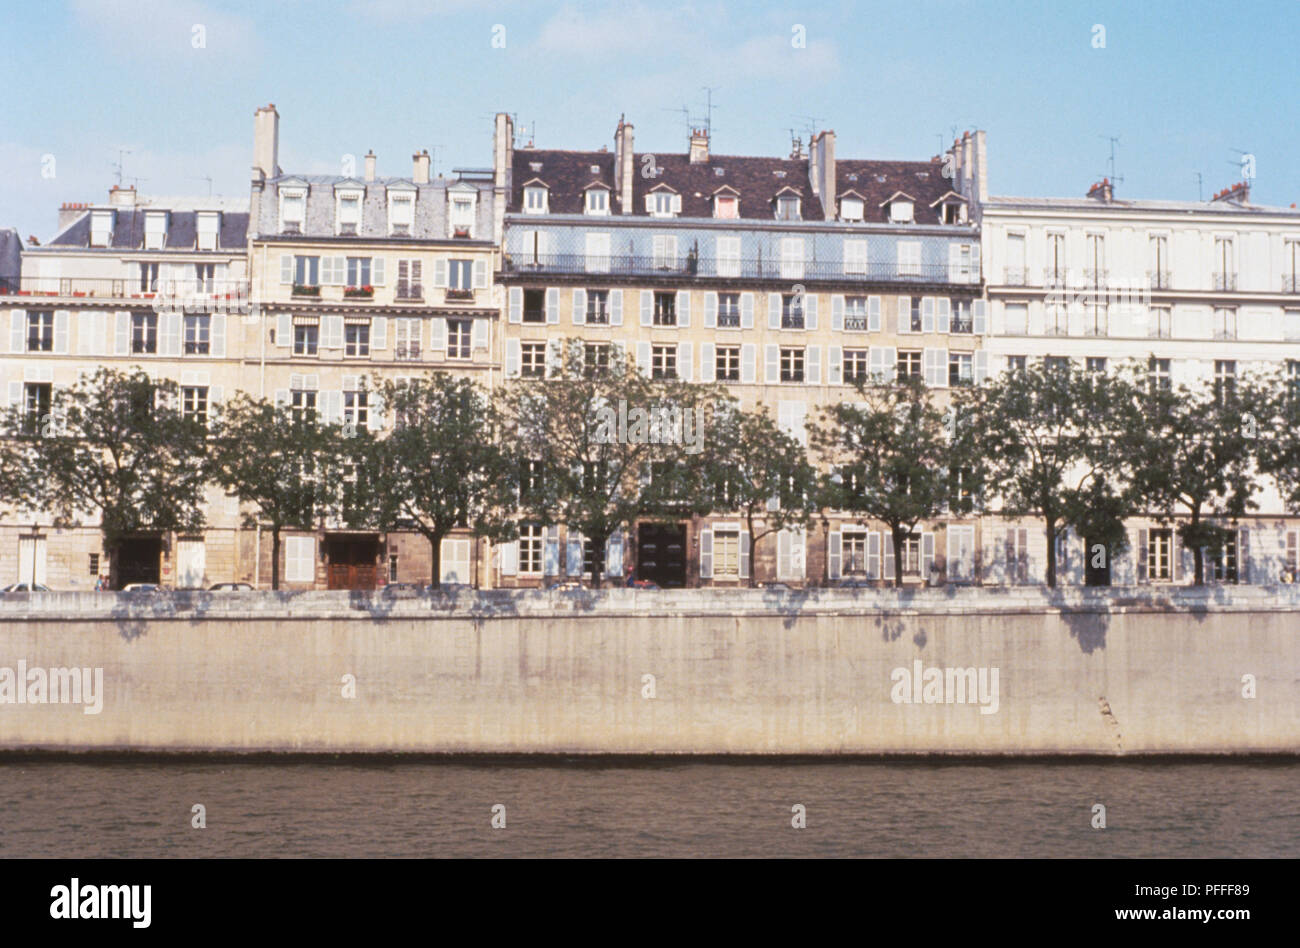 France, Paris, french buildings and trees along the Seine river. Stock Photo